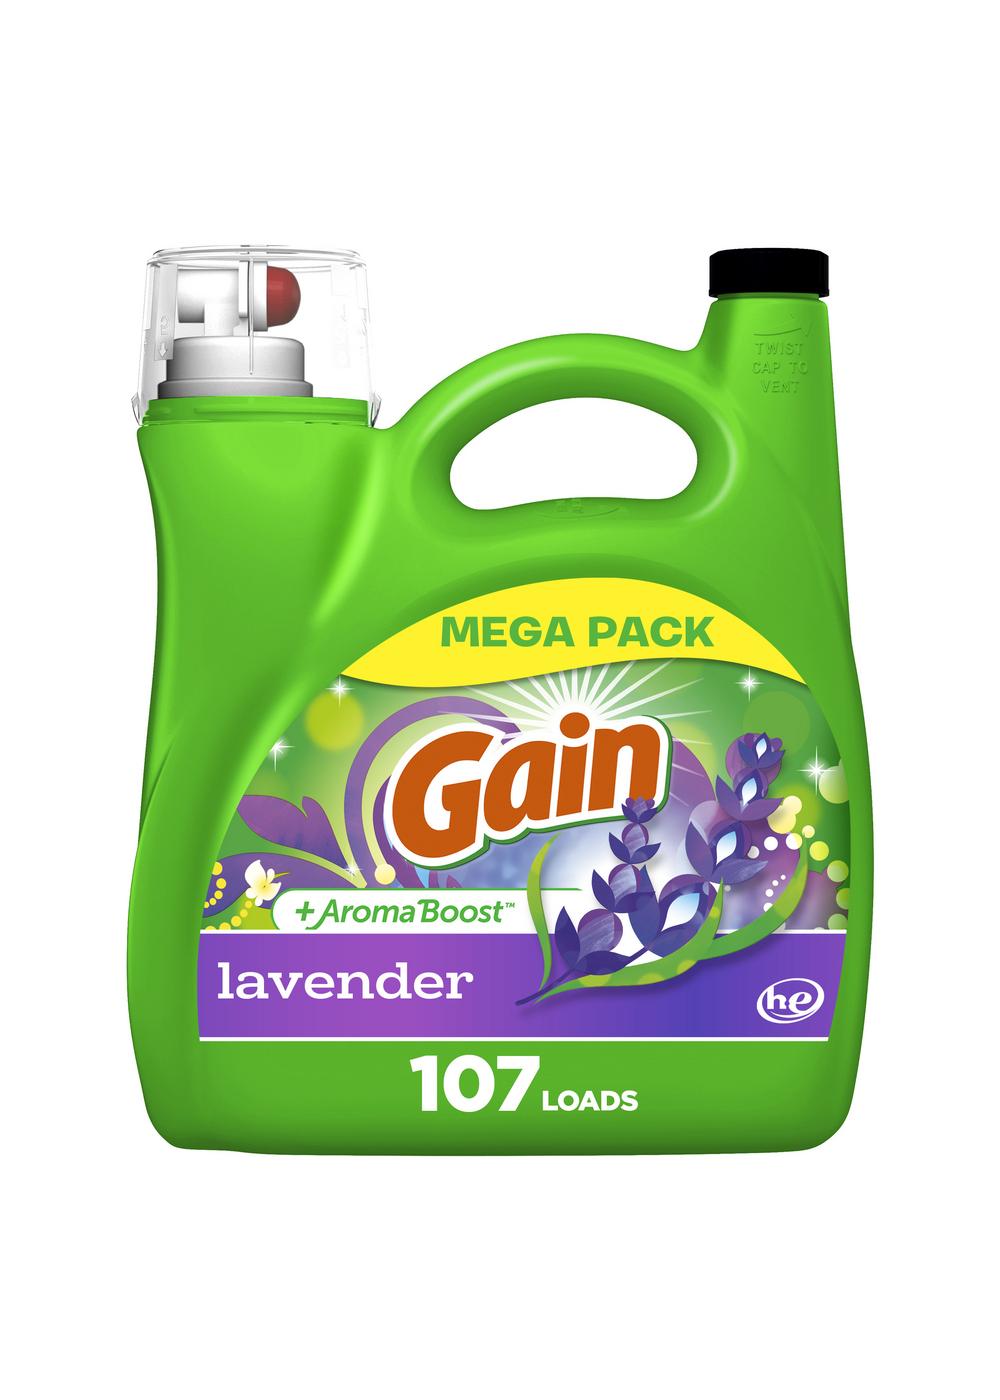 Gain + Aroma Boost HE Liquid Laundry Detergent, 107 Loads - Lavender; image 1 of 6